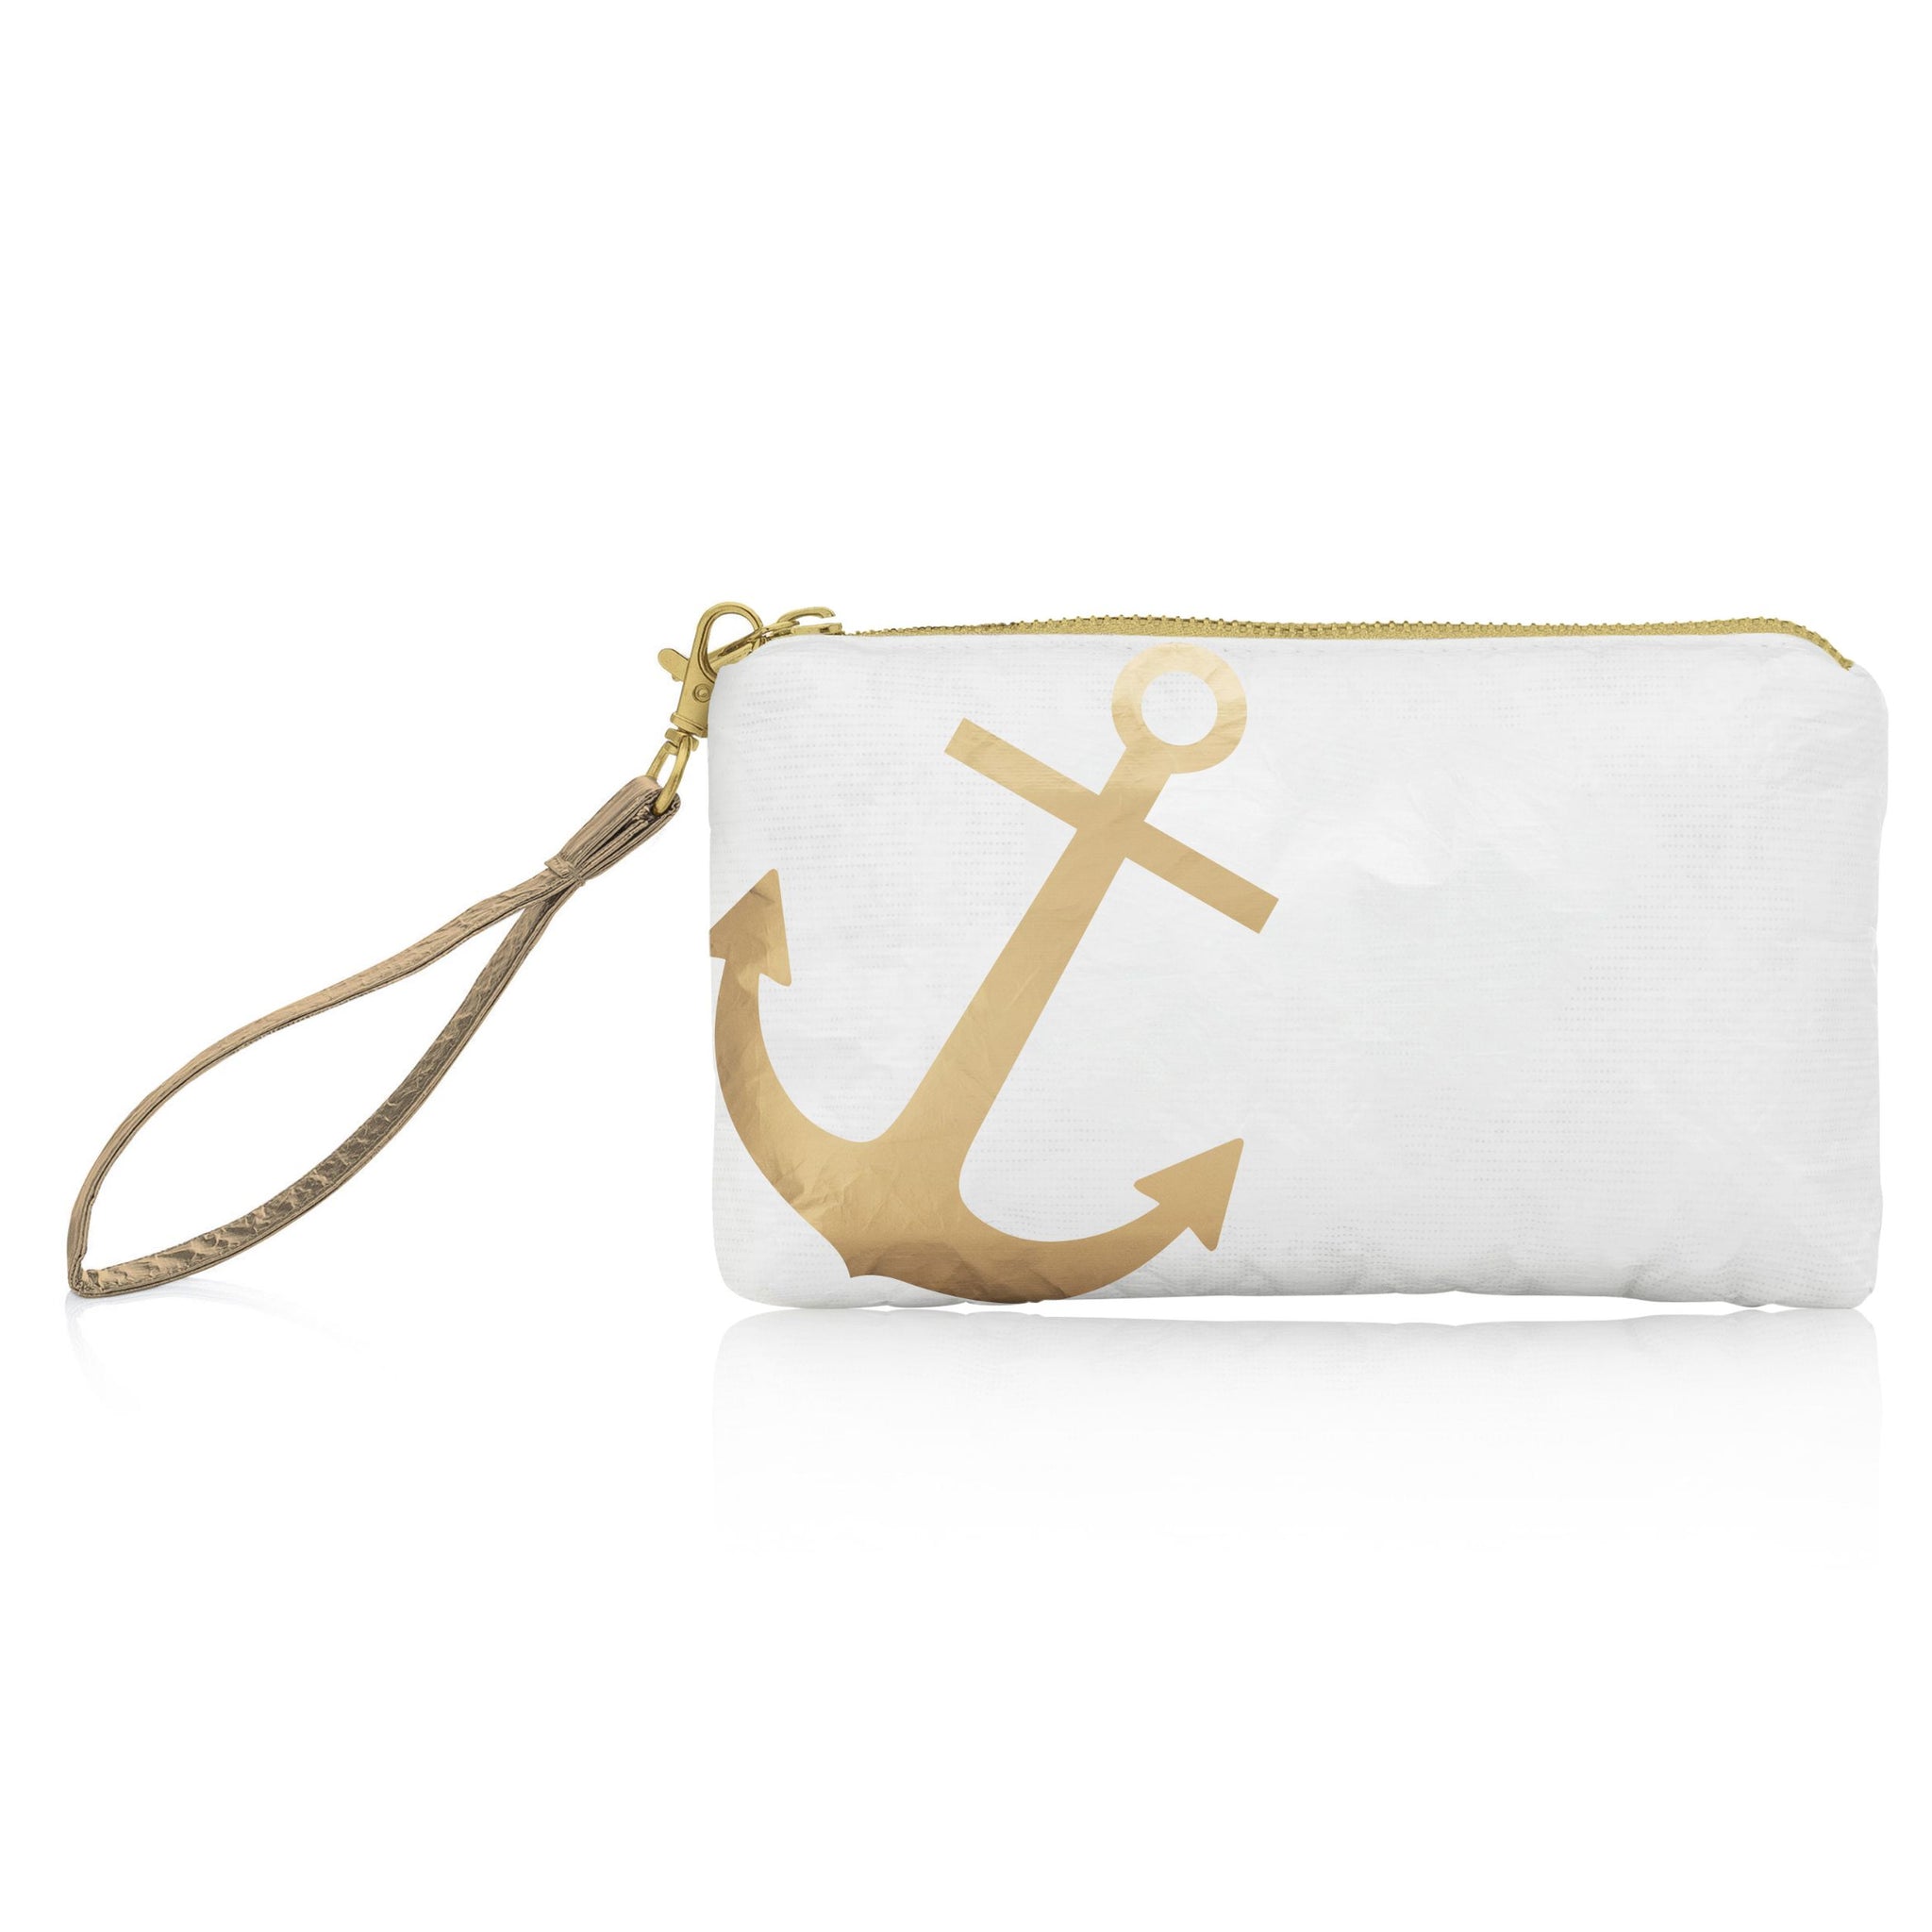 zipper wristlet in white with gold anchor